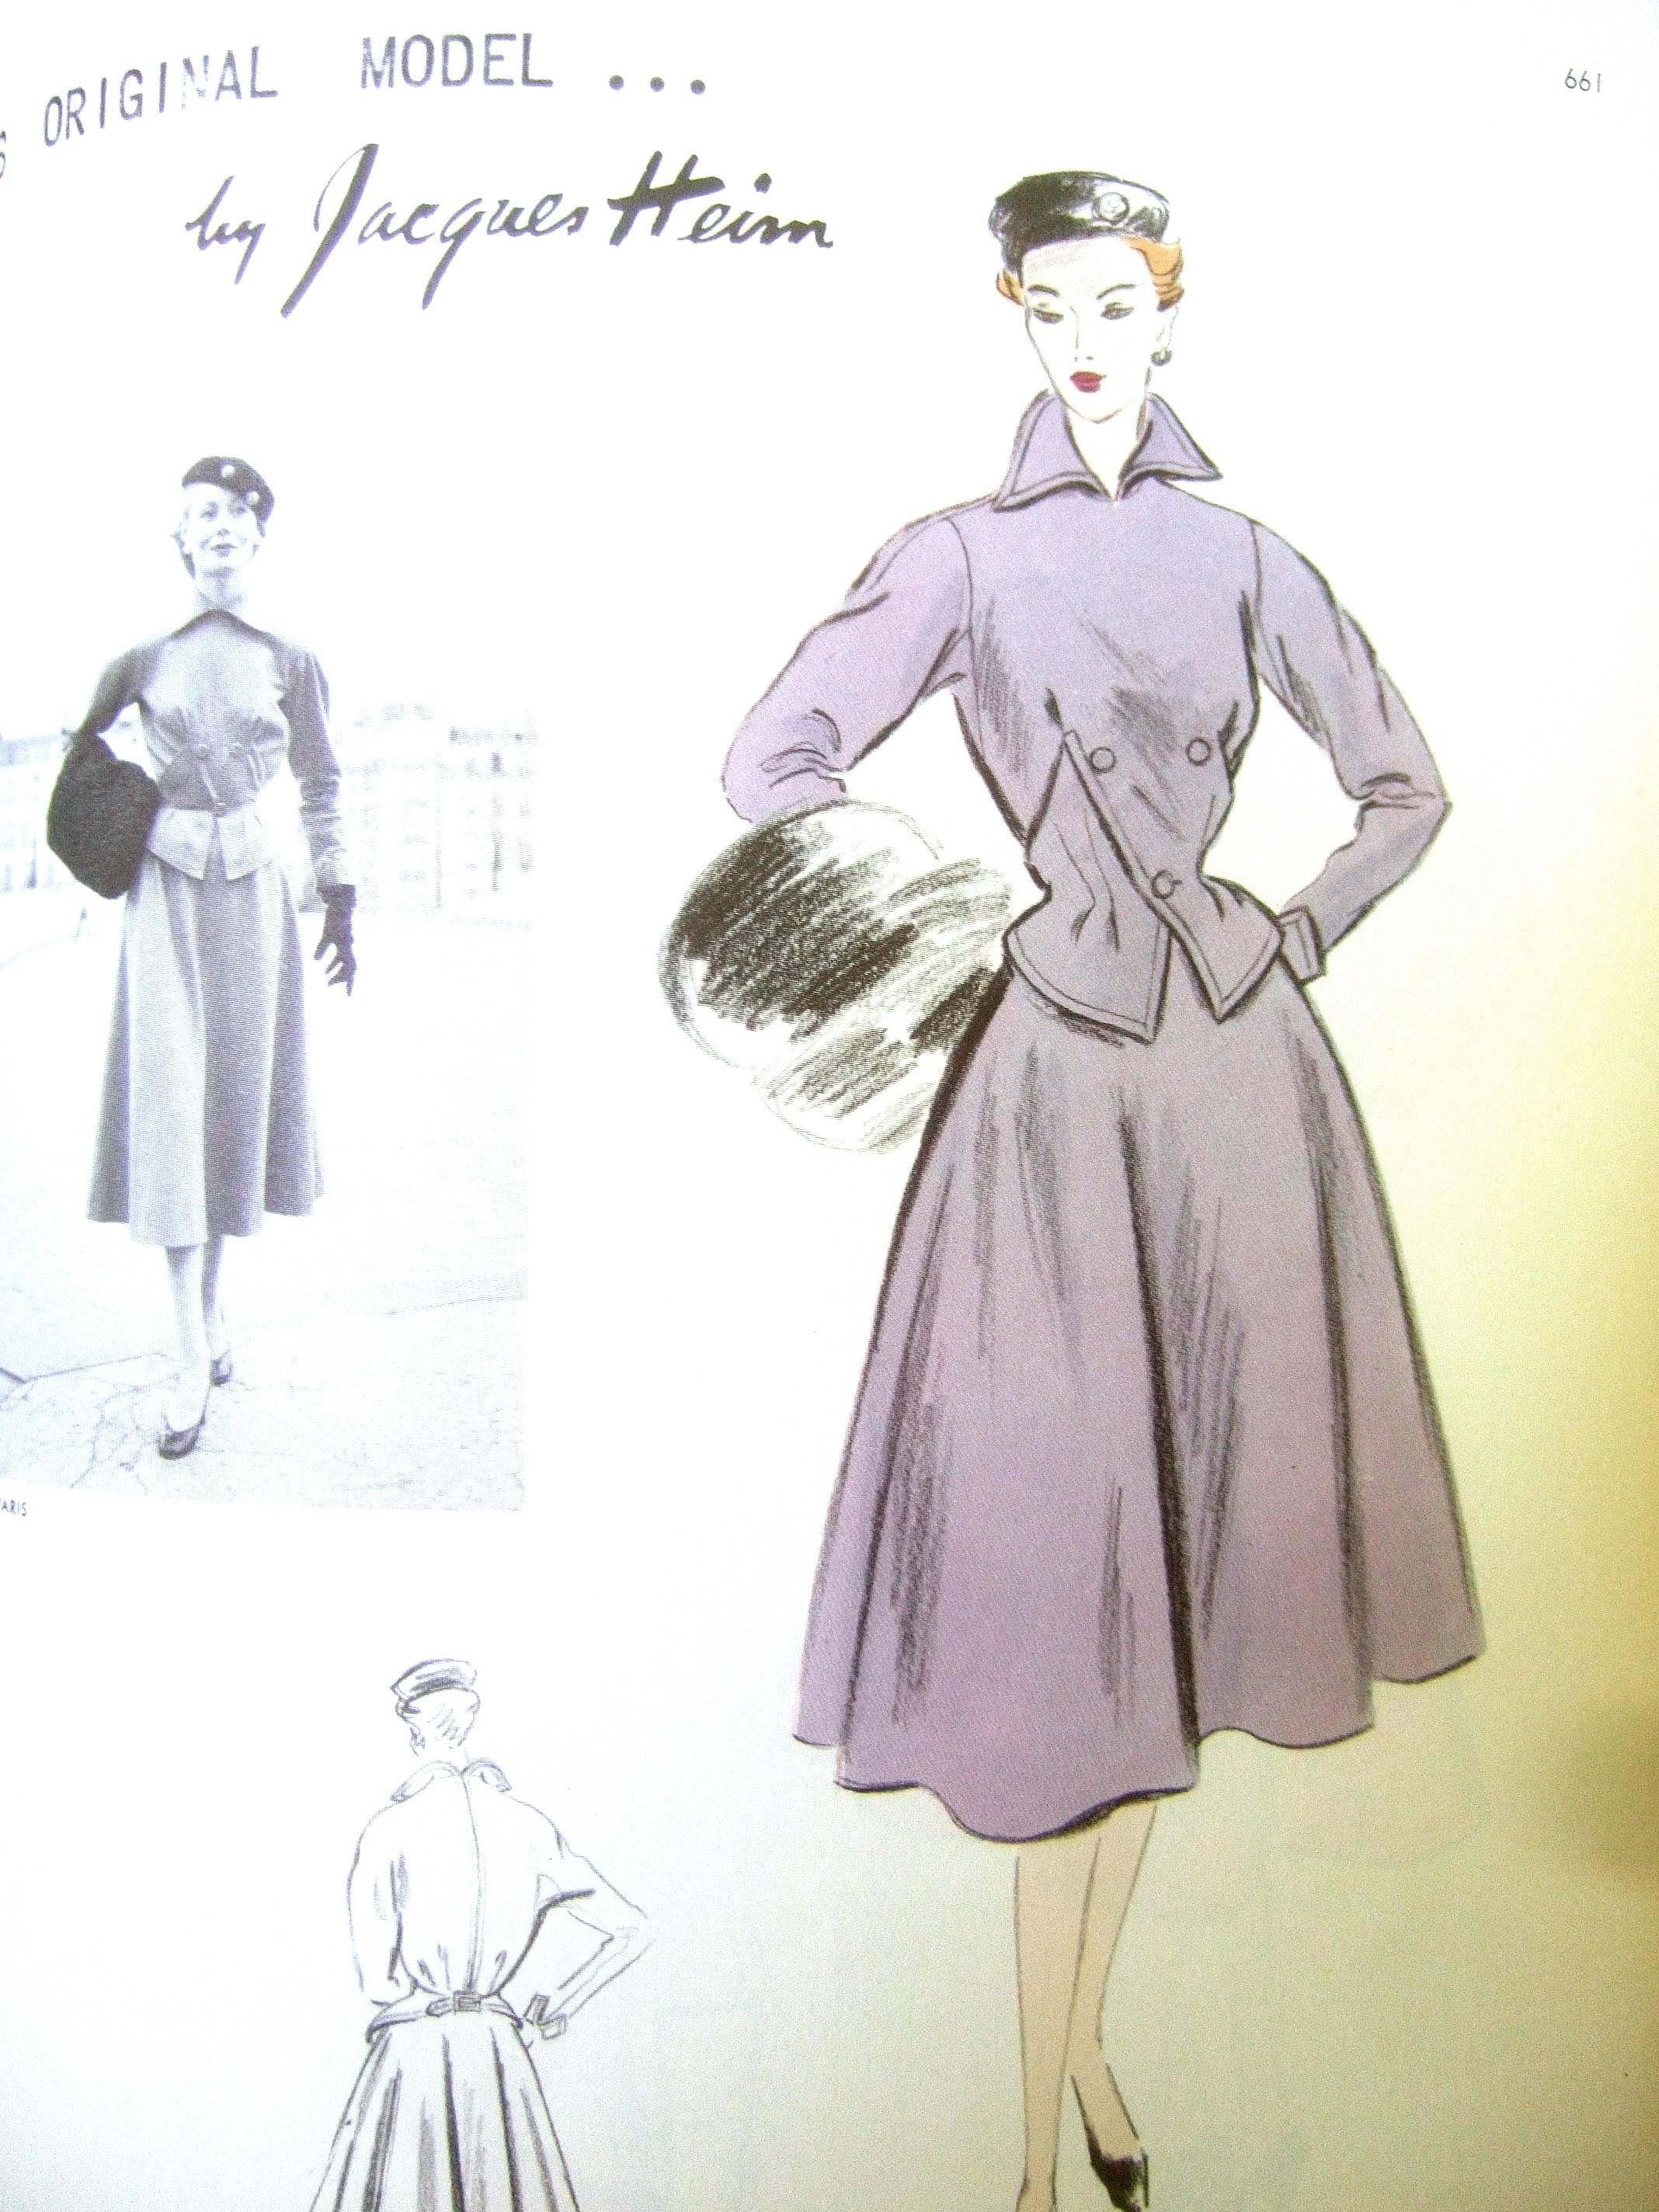 Gray 1952 Vogue Pattern Book with French Couture Illustrations  